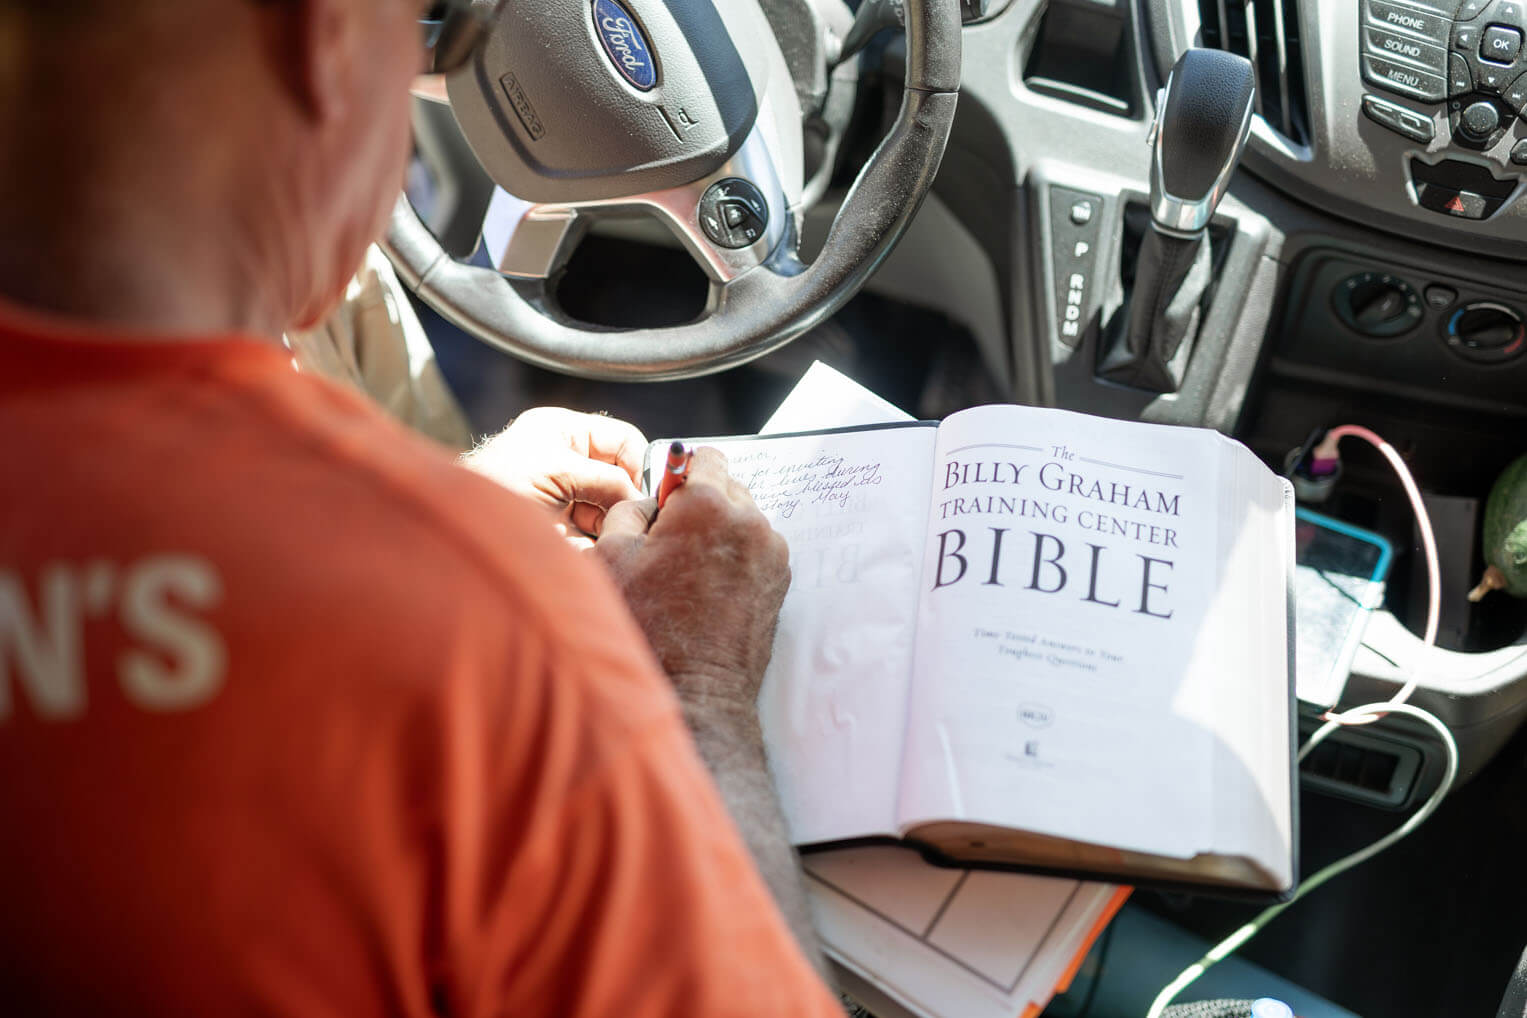 Volunteers signed a special Billy Graham Study Bible to present to the homeowner.